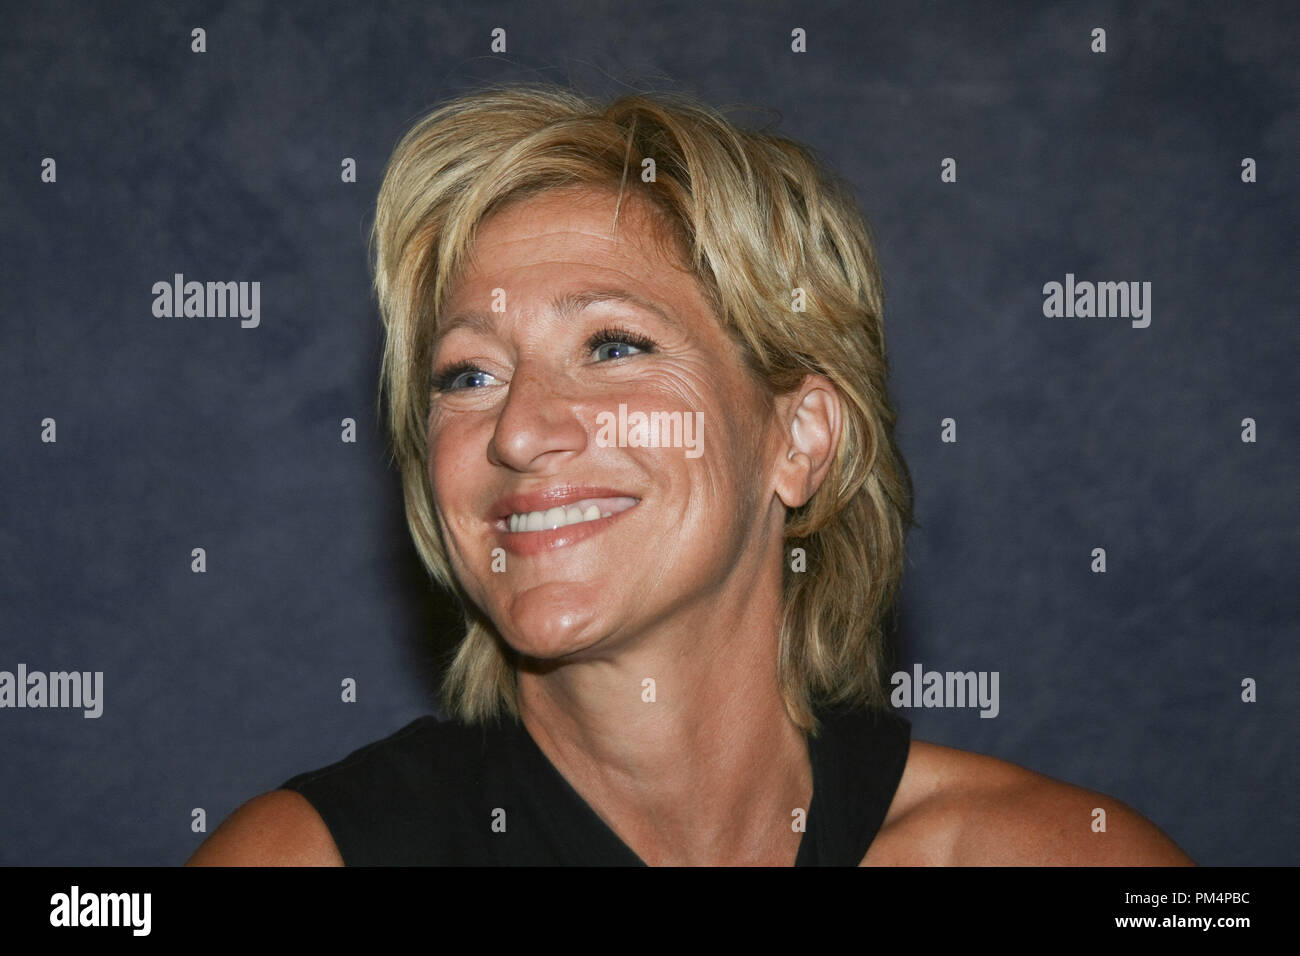 Edie Falco 'Nurse Jackie' Portrait Session, August 30, 2010.  Reproduction by American tabloids is absolutely forbidden. File Reference # 30459 002JRC  For Editorial Use Only -  All Rights Reserved Stock Photo